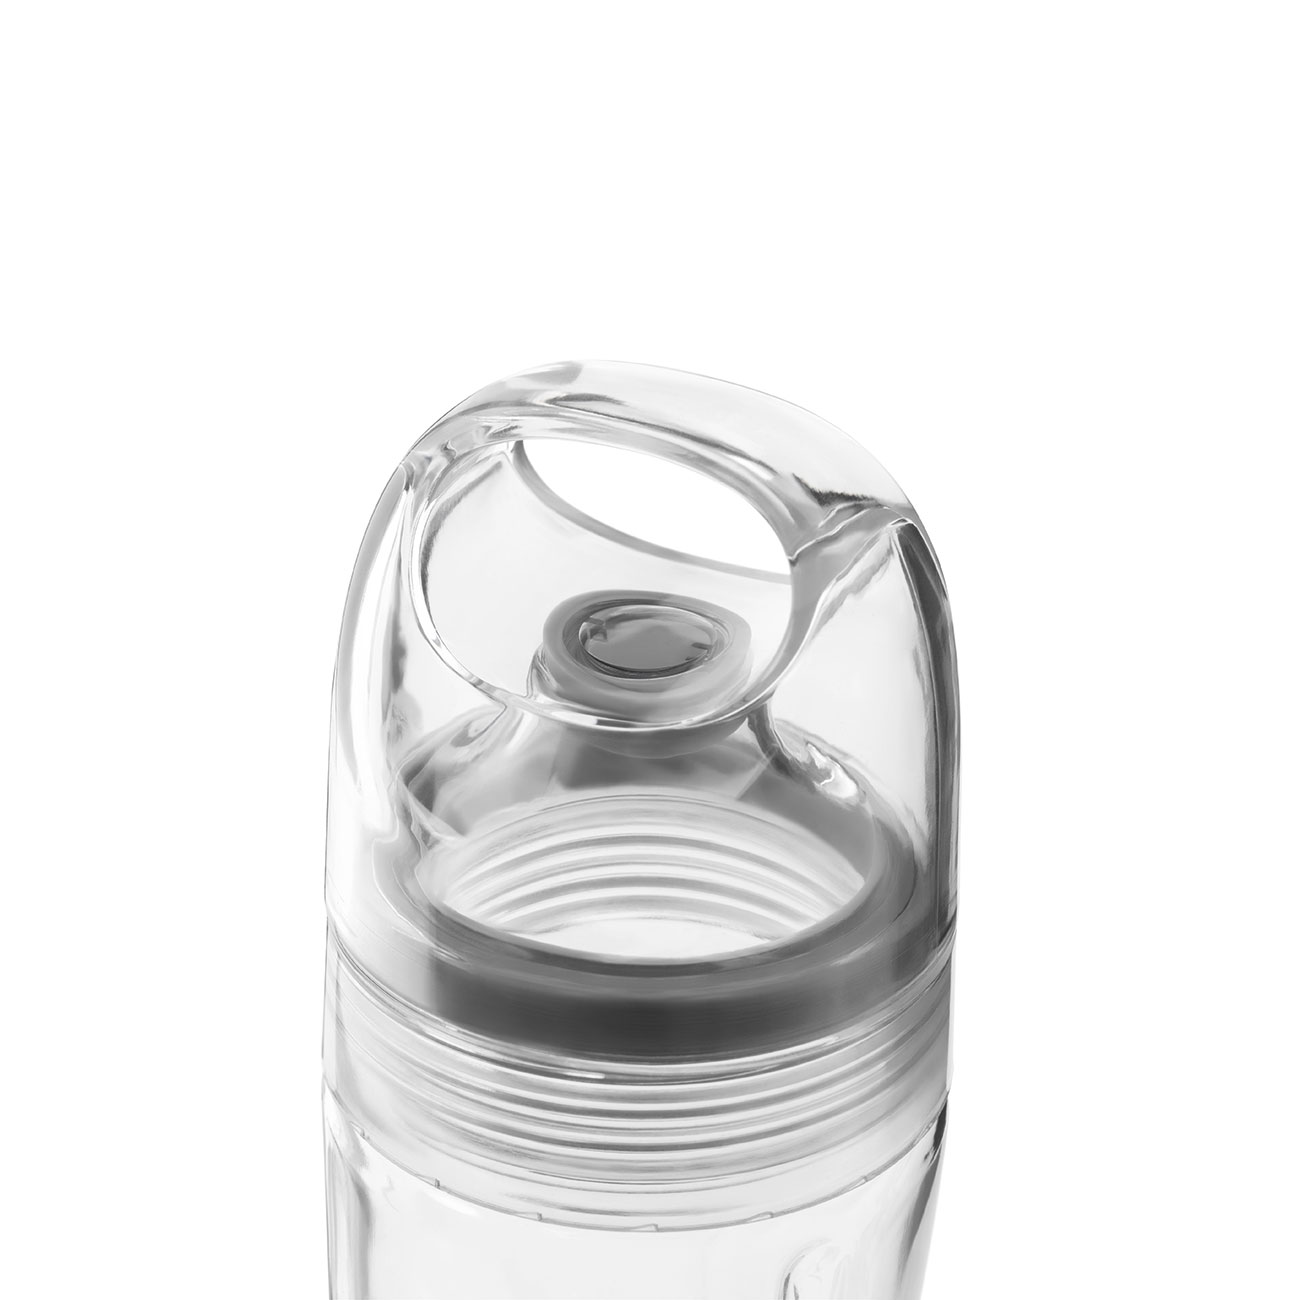 Bottle To Go with blades accessory for Smeg Blender - BGF01_4